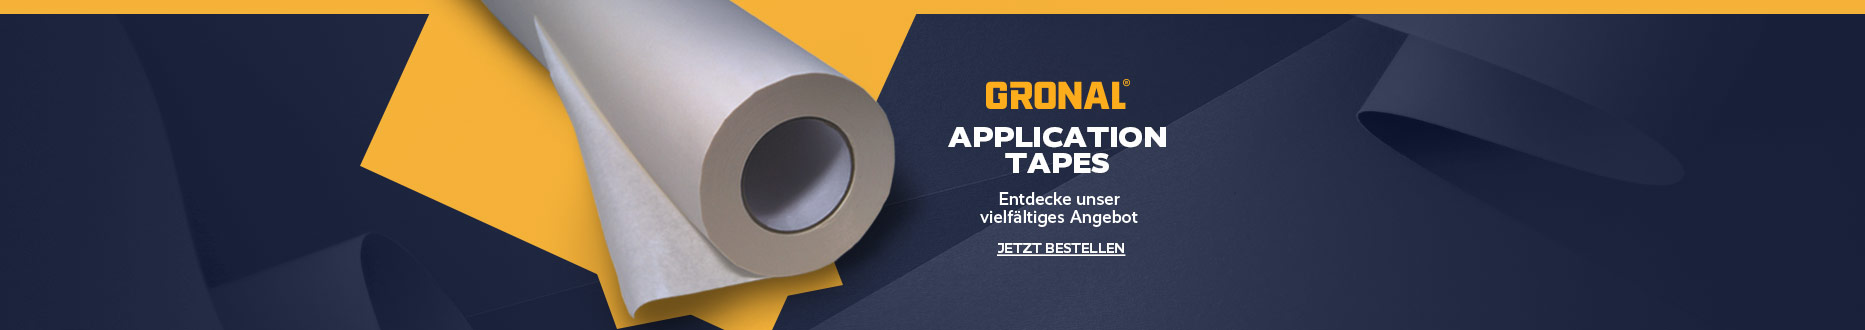 Gronal Application Tapes